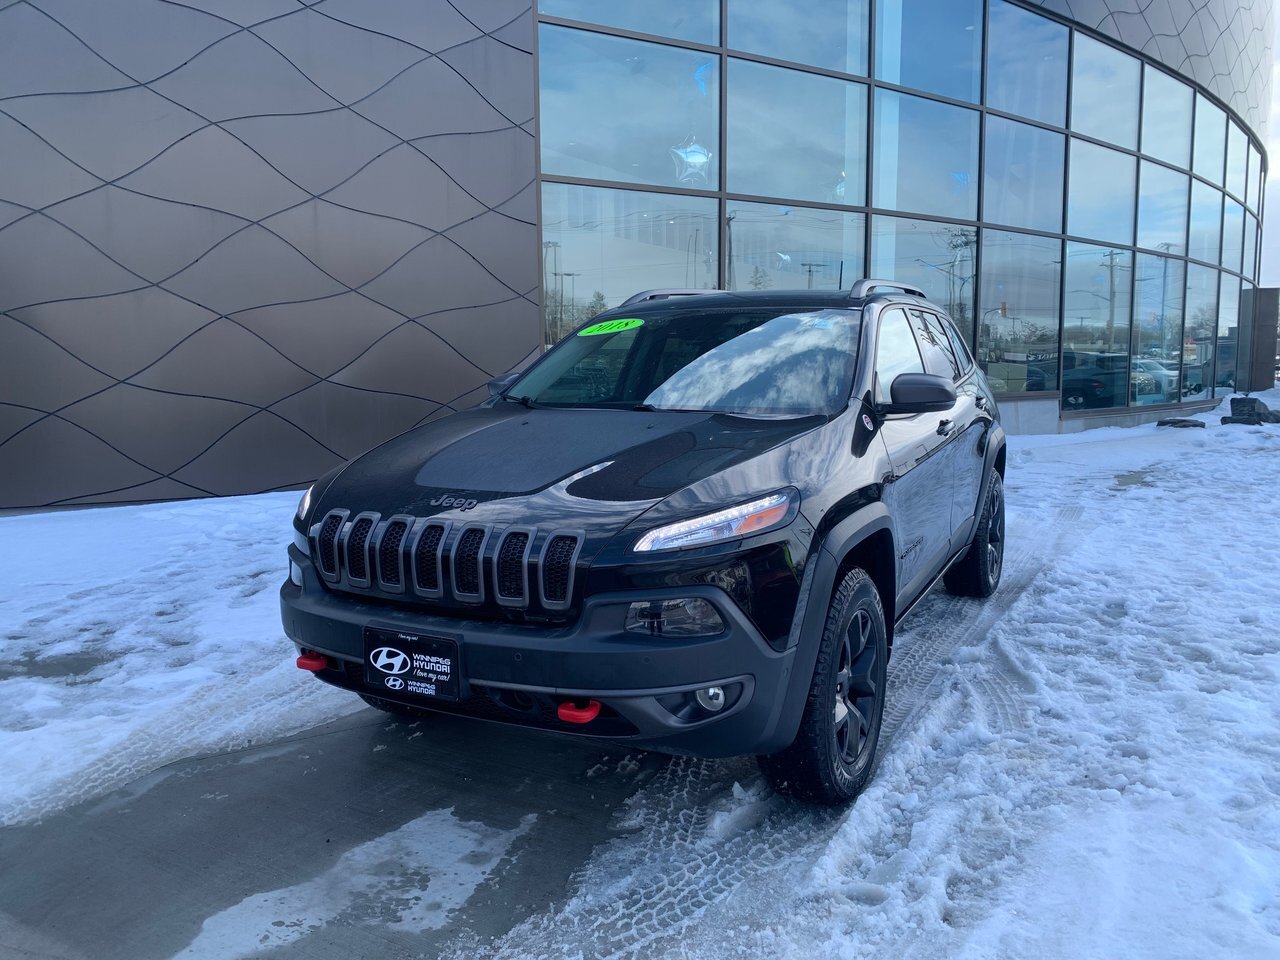 2018 Jeep Cherokee Trailhawk Leather Plus Heated/vented seats, heated